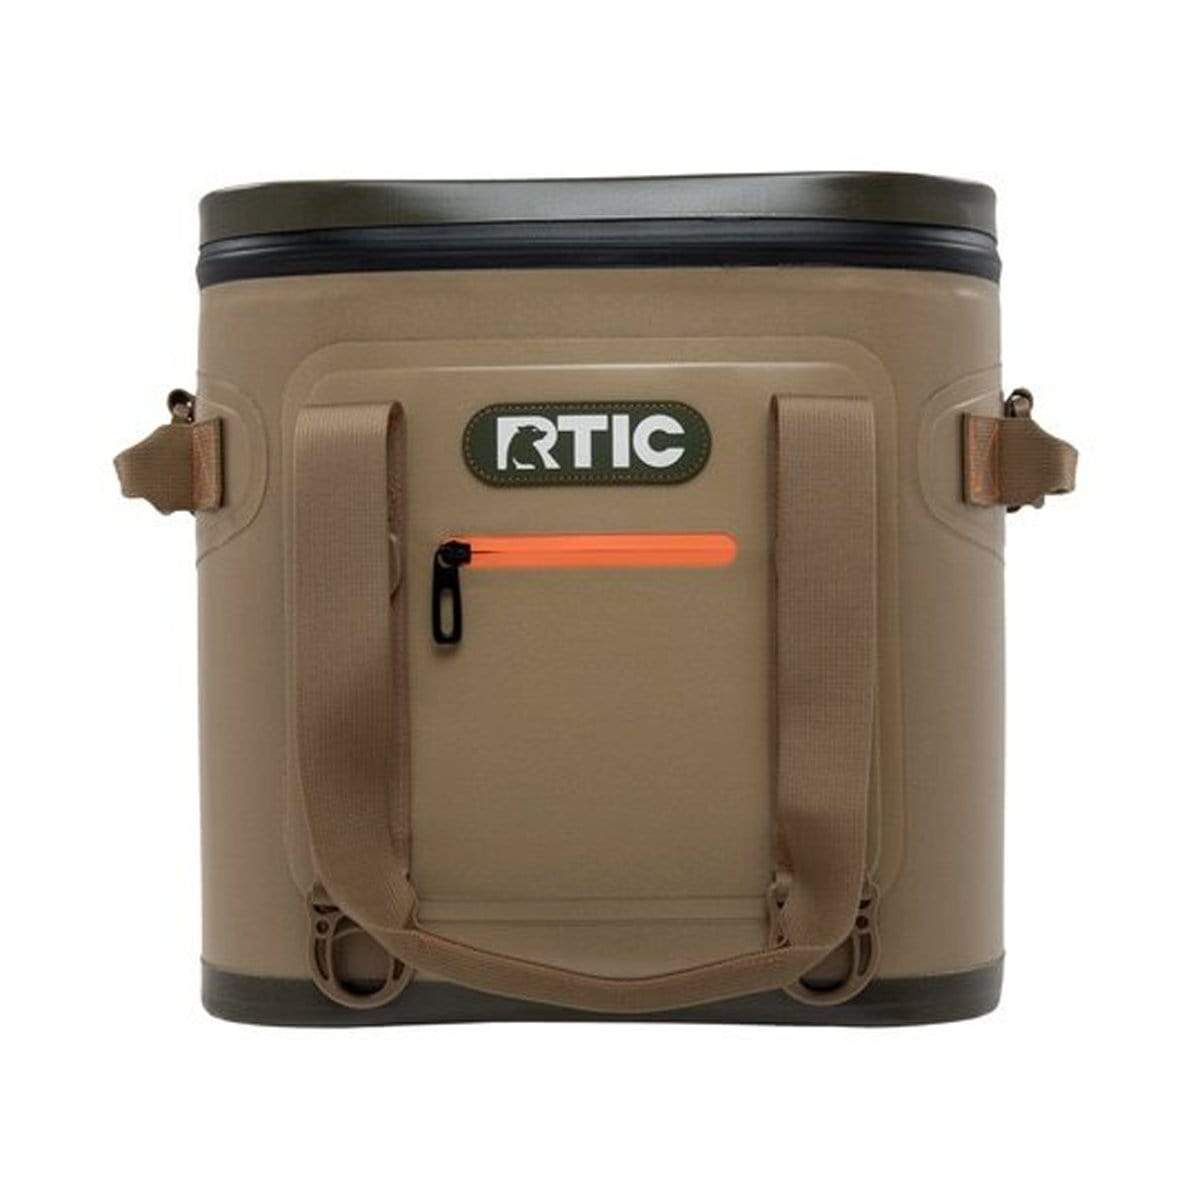 RTIC Soft Pack 20 Insulated Cooler Blue & Grey